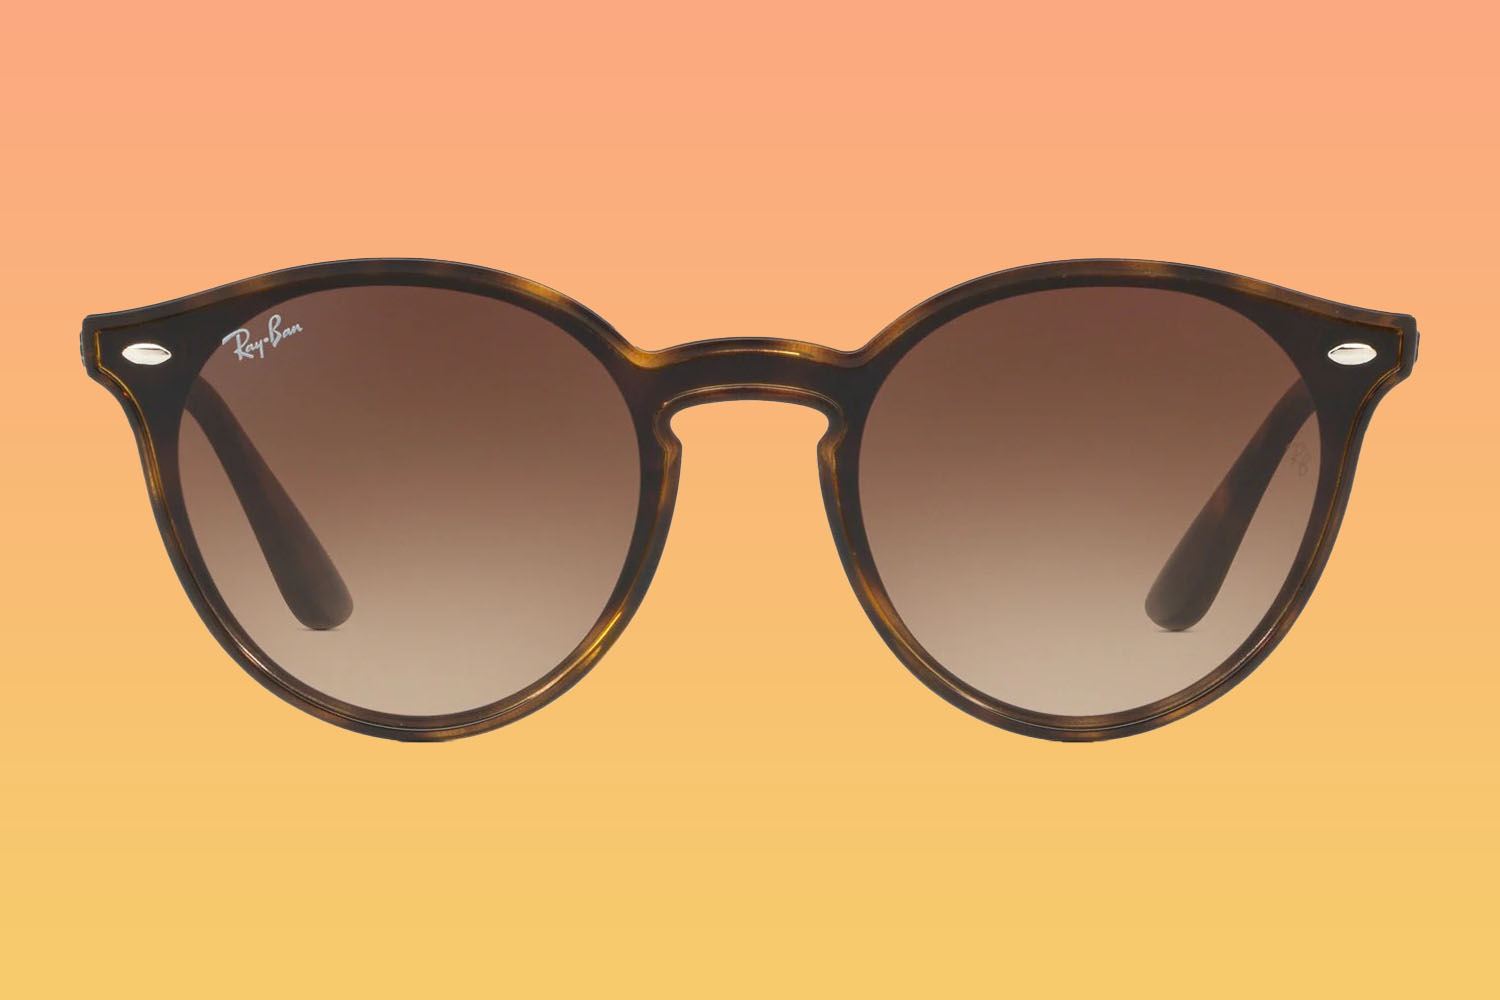 A pair of Ray-Ban sunglasses on a orange-to-yellow gradient background 